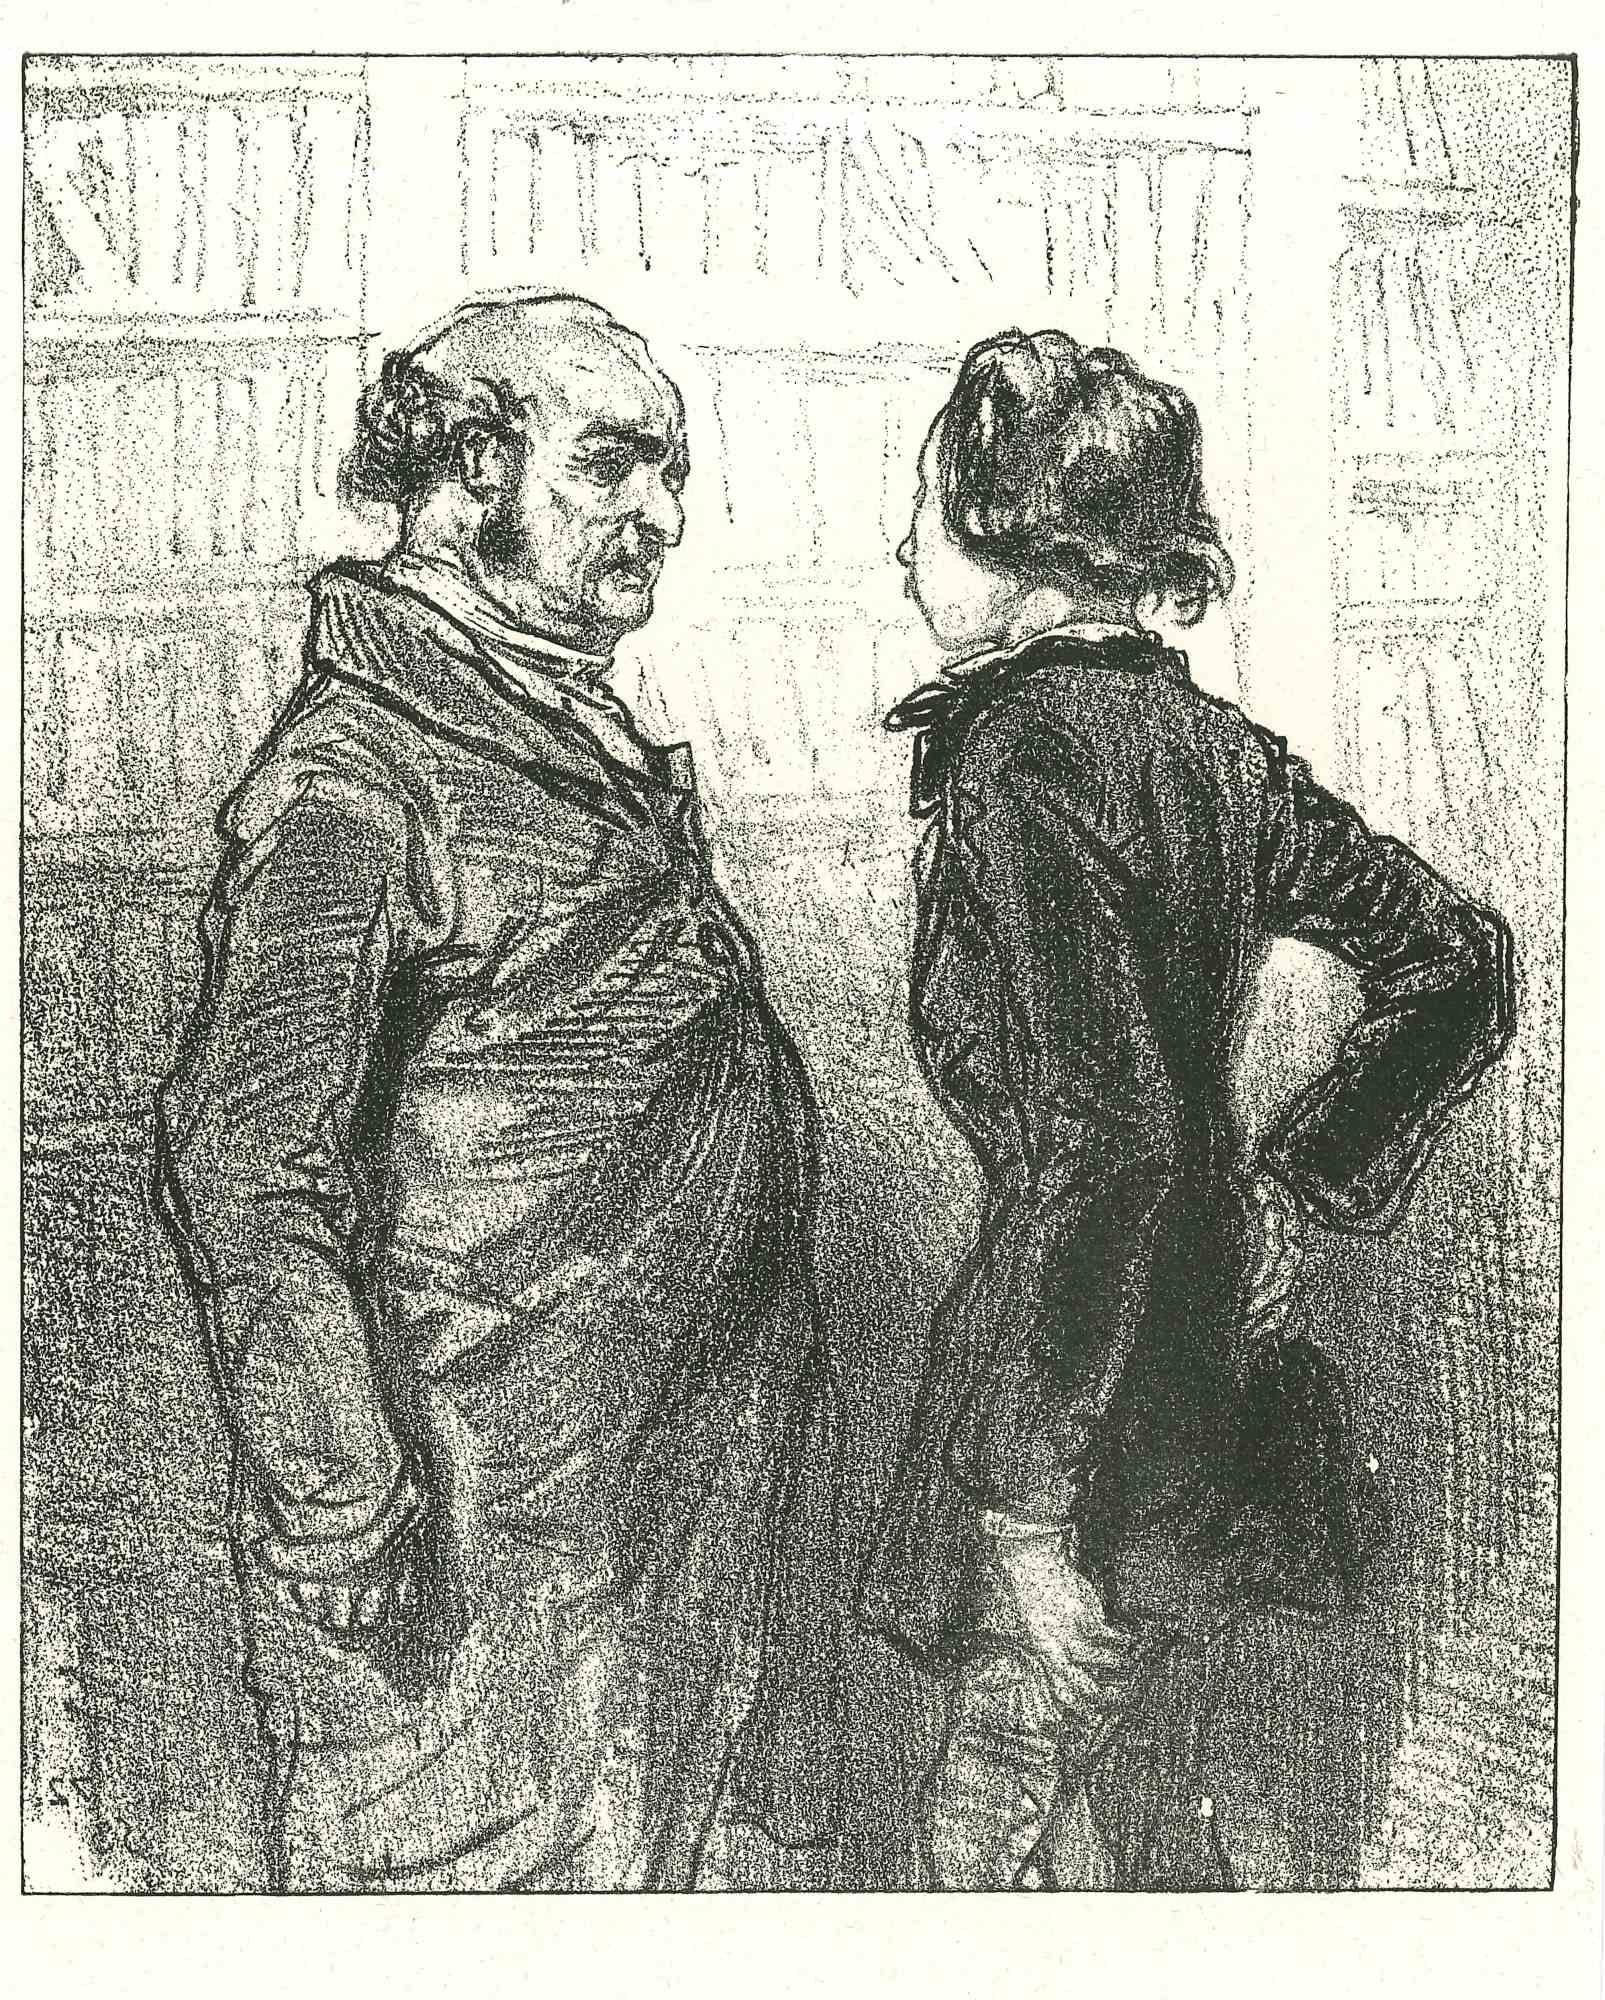 The Conversation is an original lithograph artwork on ivory-colored paper, realized by the French draftsman Paul Gavarni (after) (alias Guillaume Sulpice Chevalier Gavarni, 1804-1866) in Paris, 1881, in the collection of Illustrations for "La